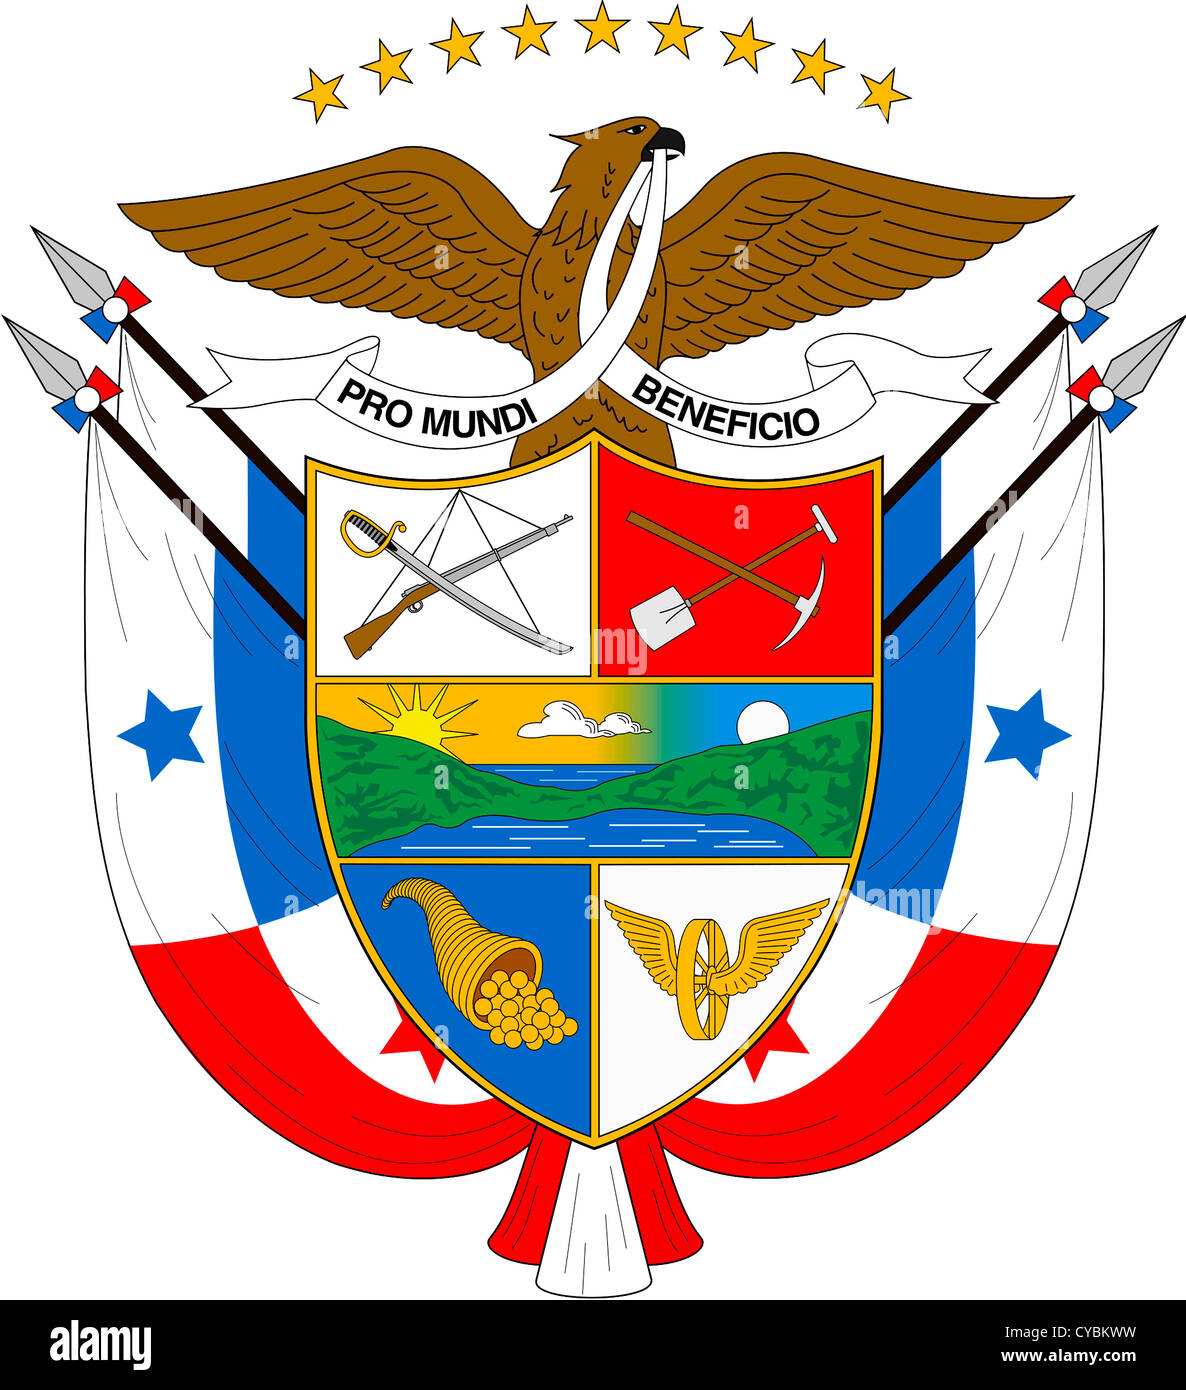 Coat of arms of the Republic of Panama. Stock Photo